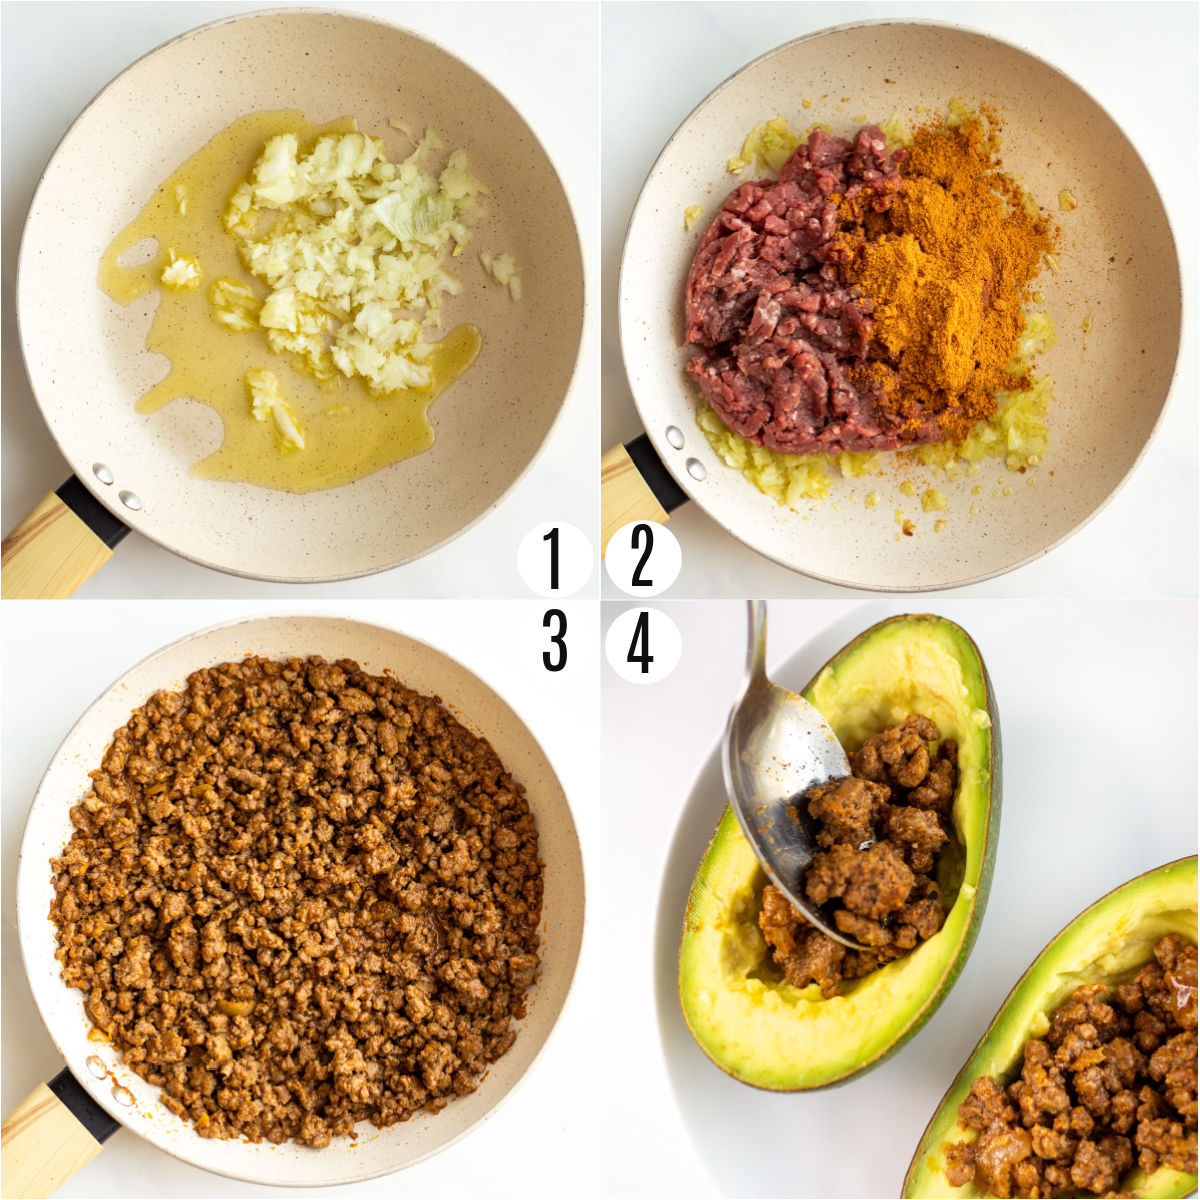 Step by step photos showing how to make avocado tacos.